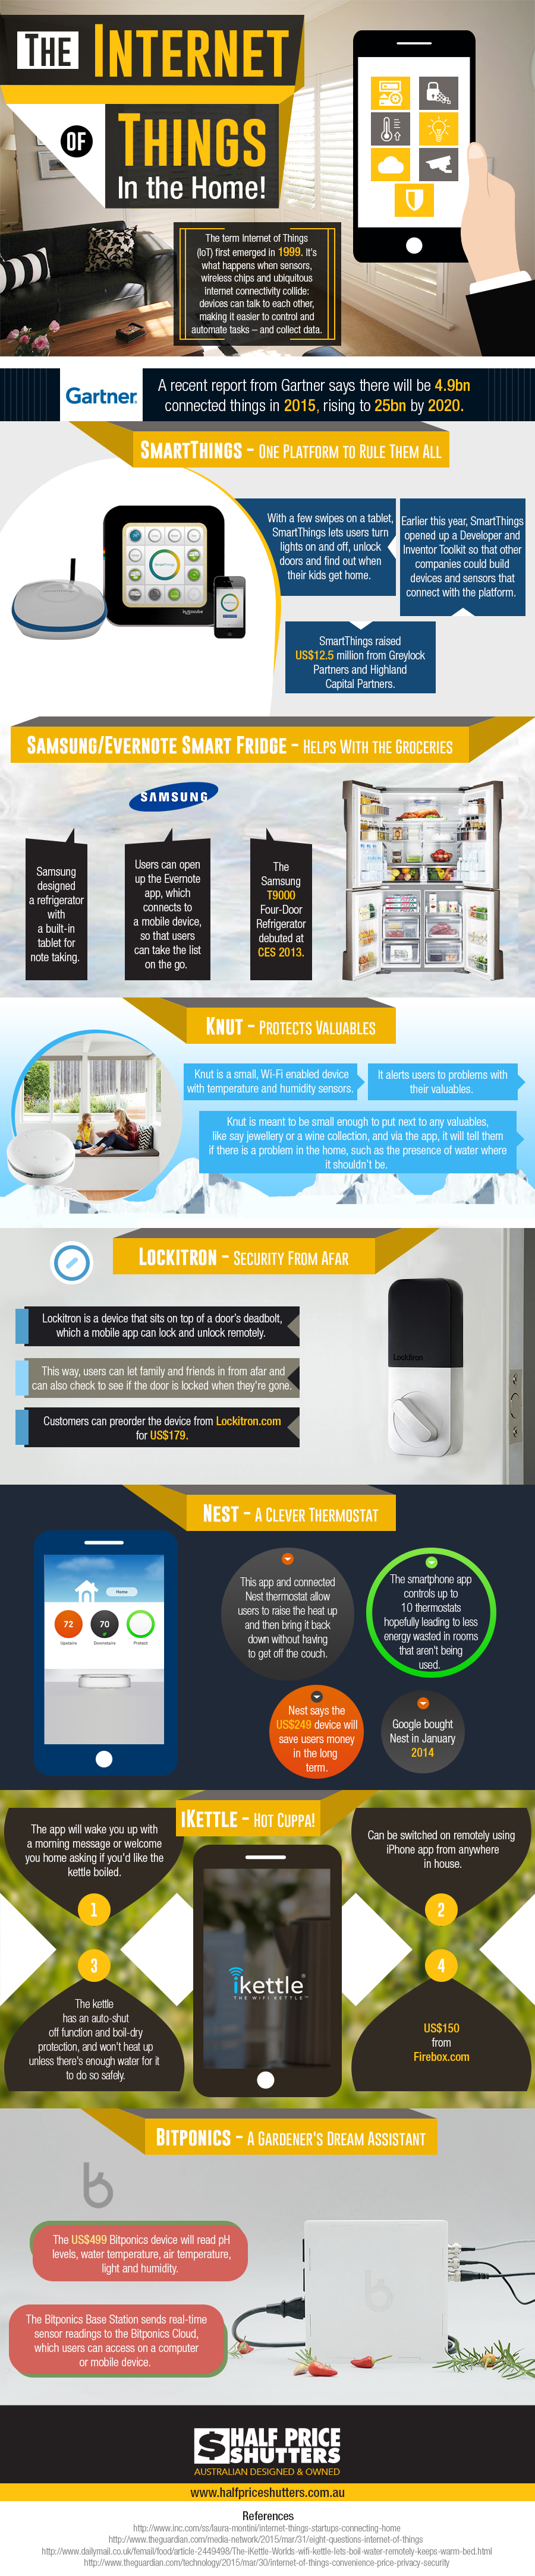 Internet-of-Things-Home-An-Info-graphic